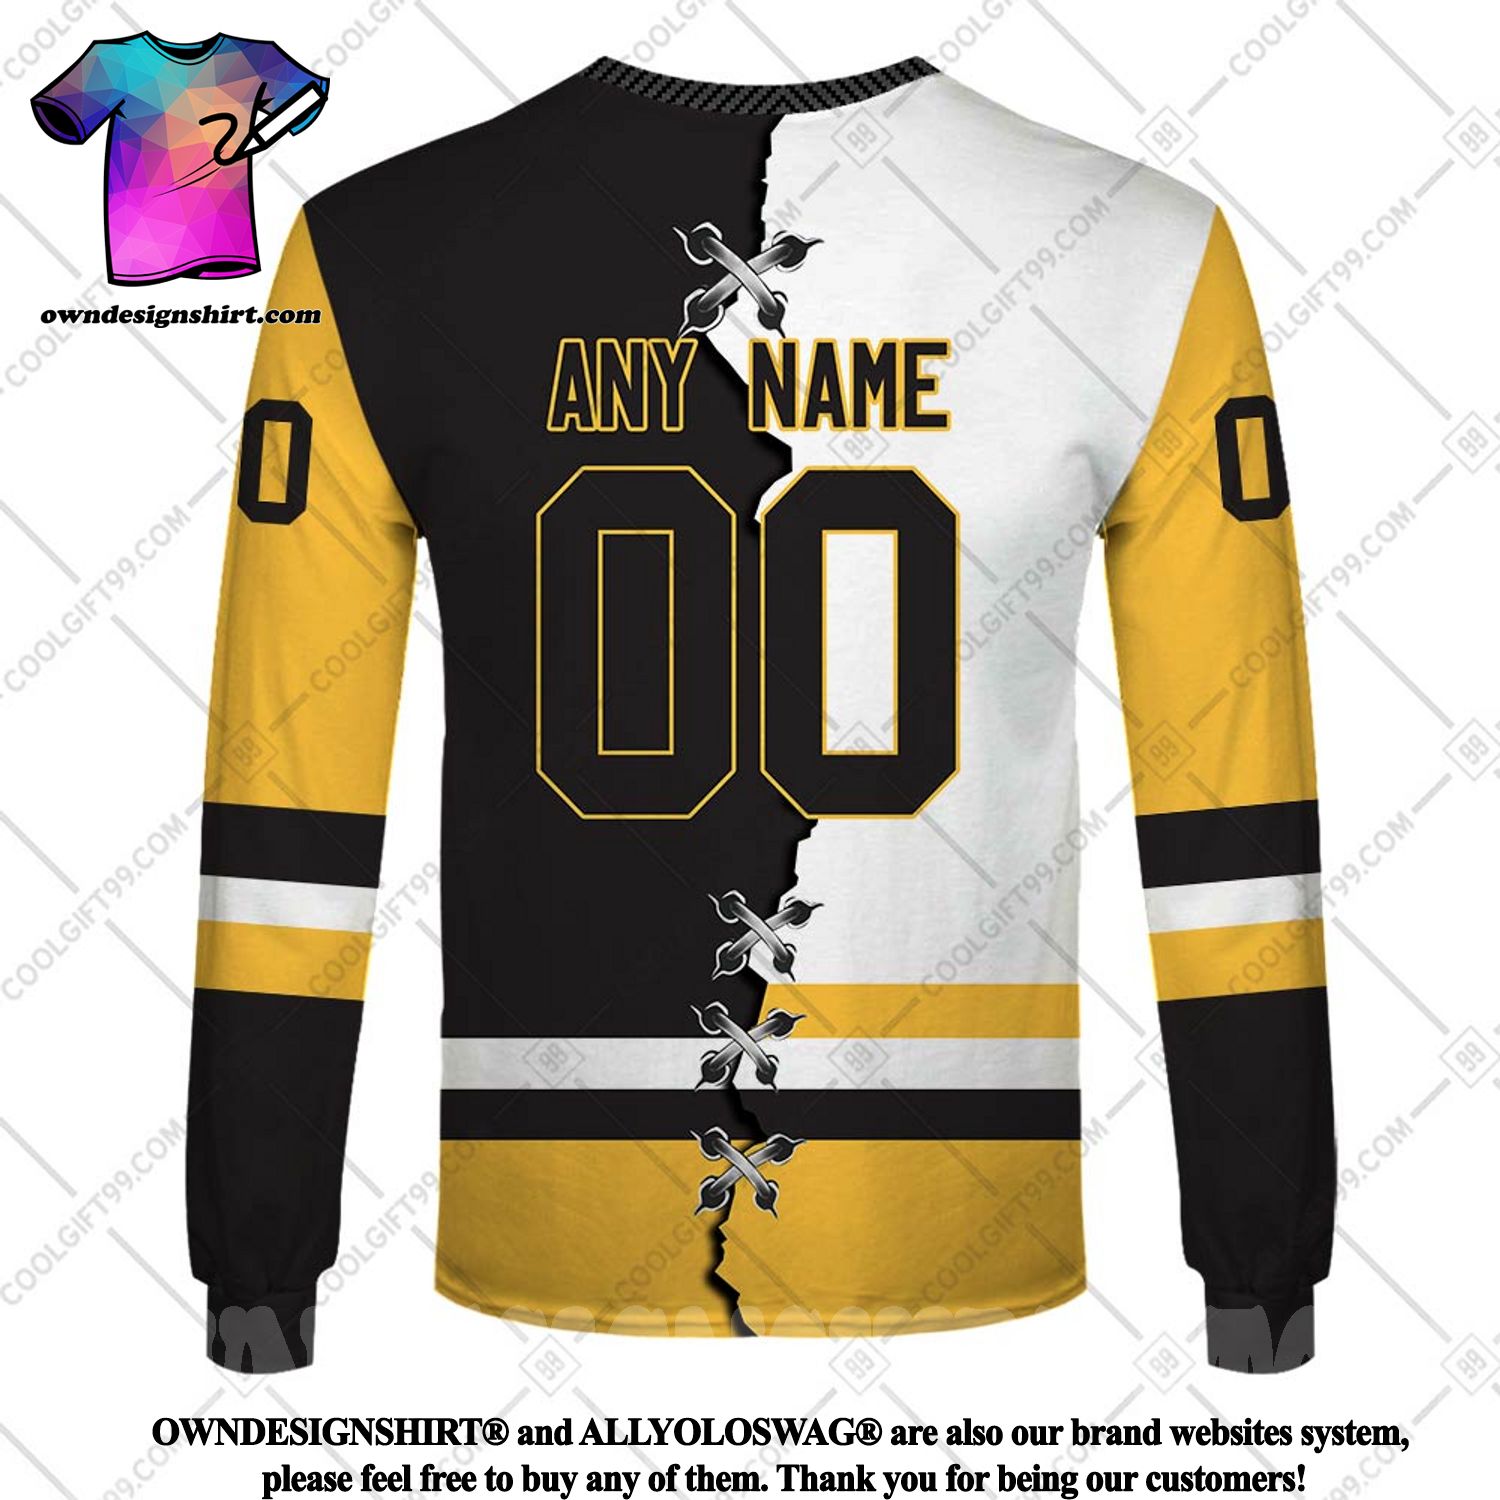 Wilkes-Barre/Scranton was having a jersey design contest for a new